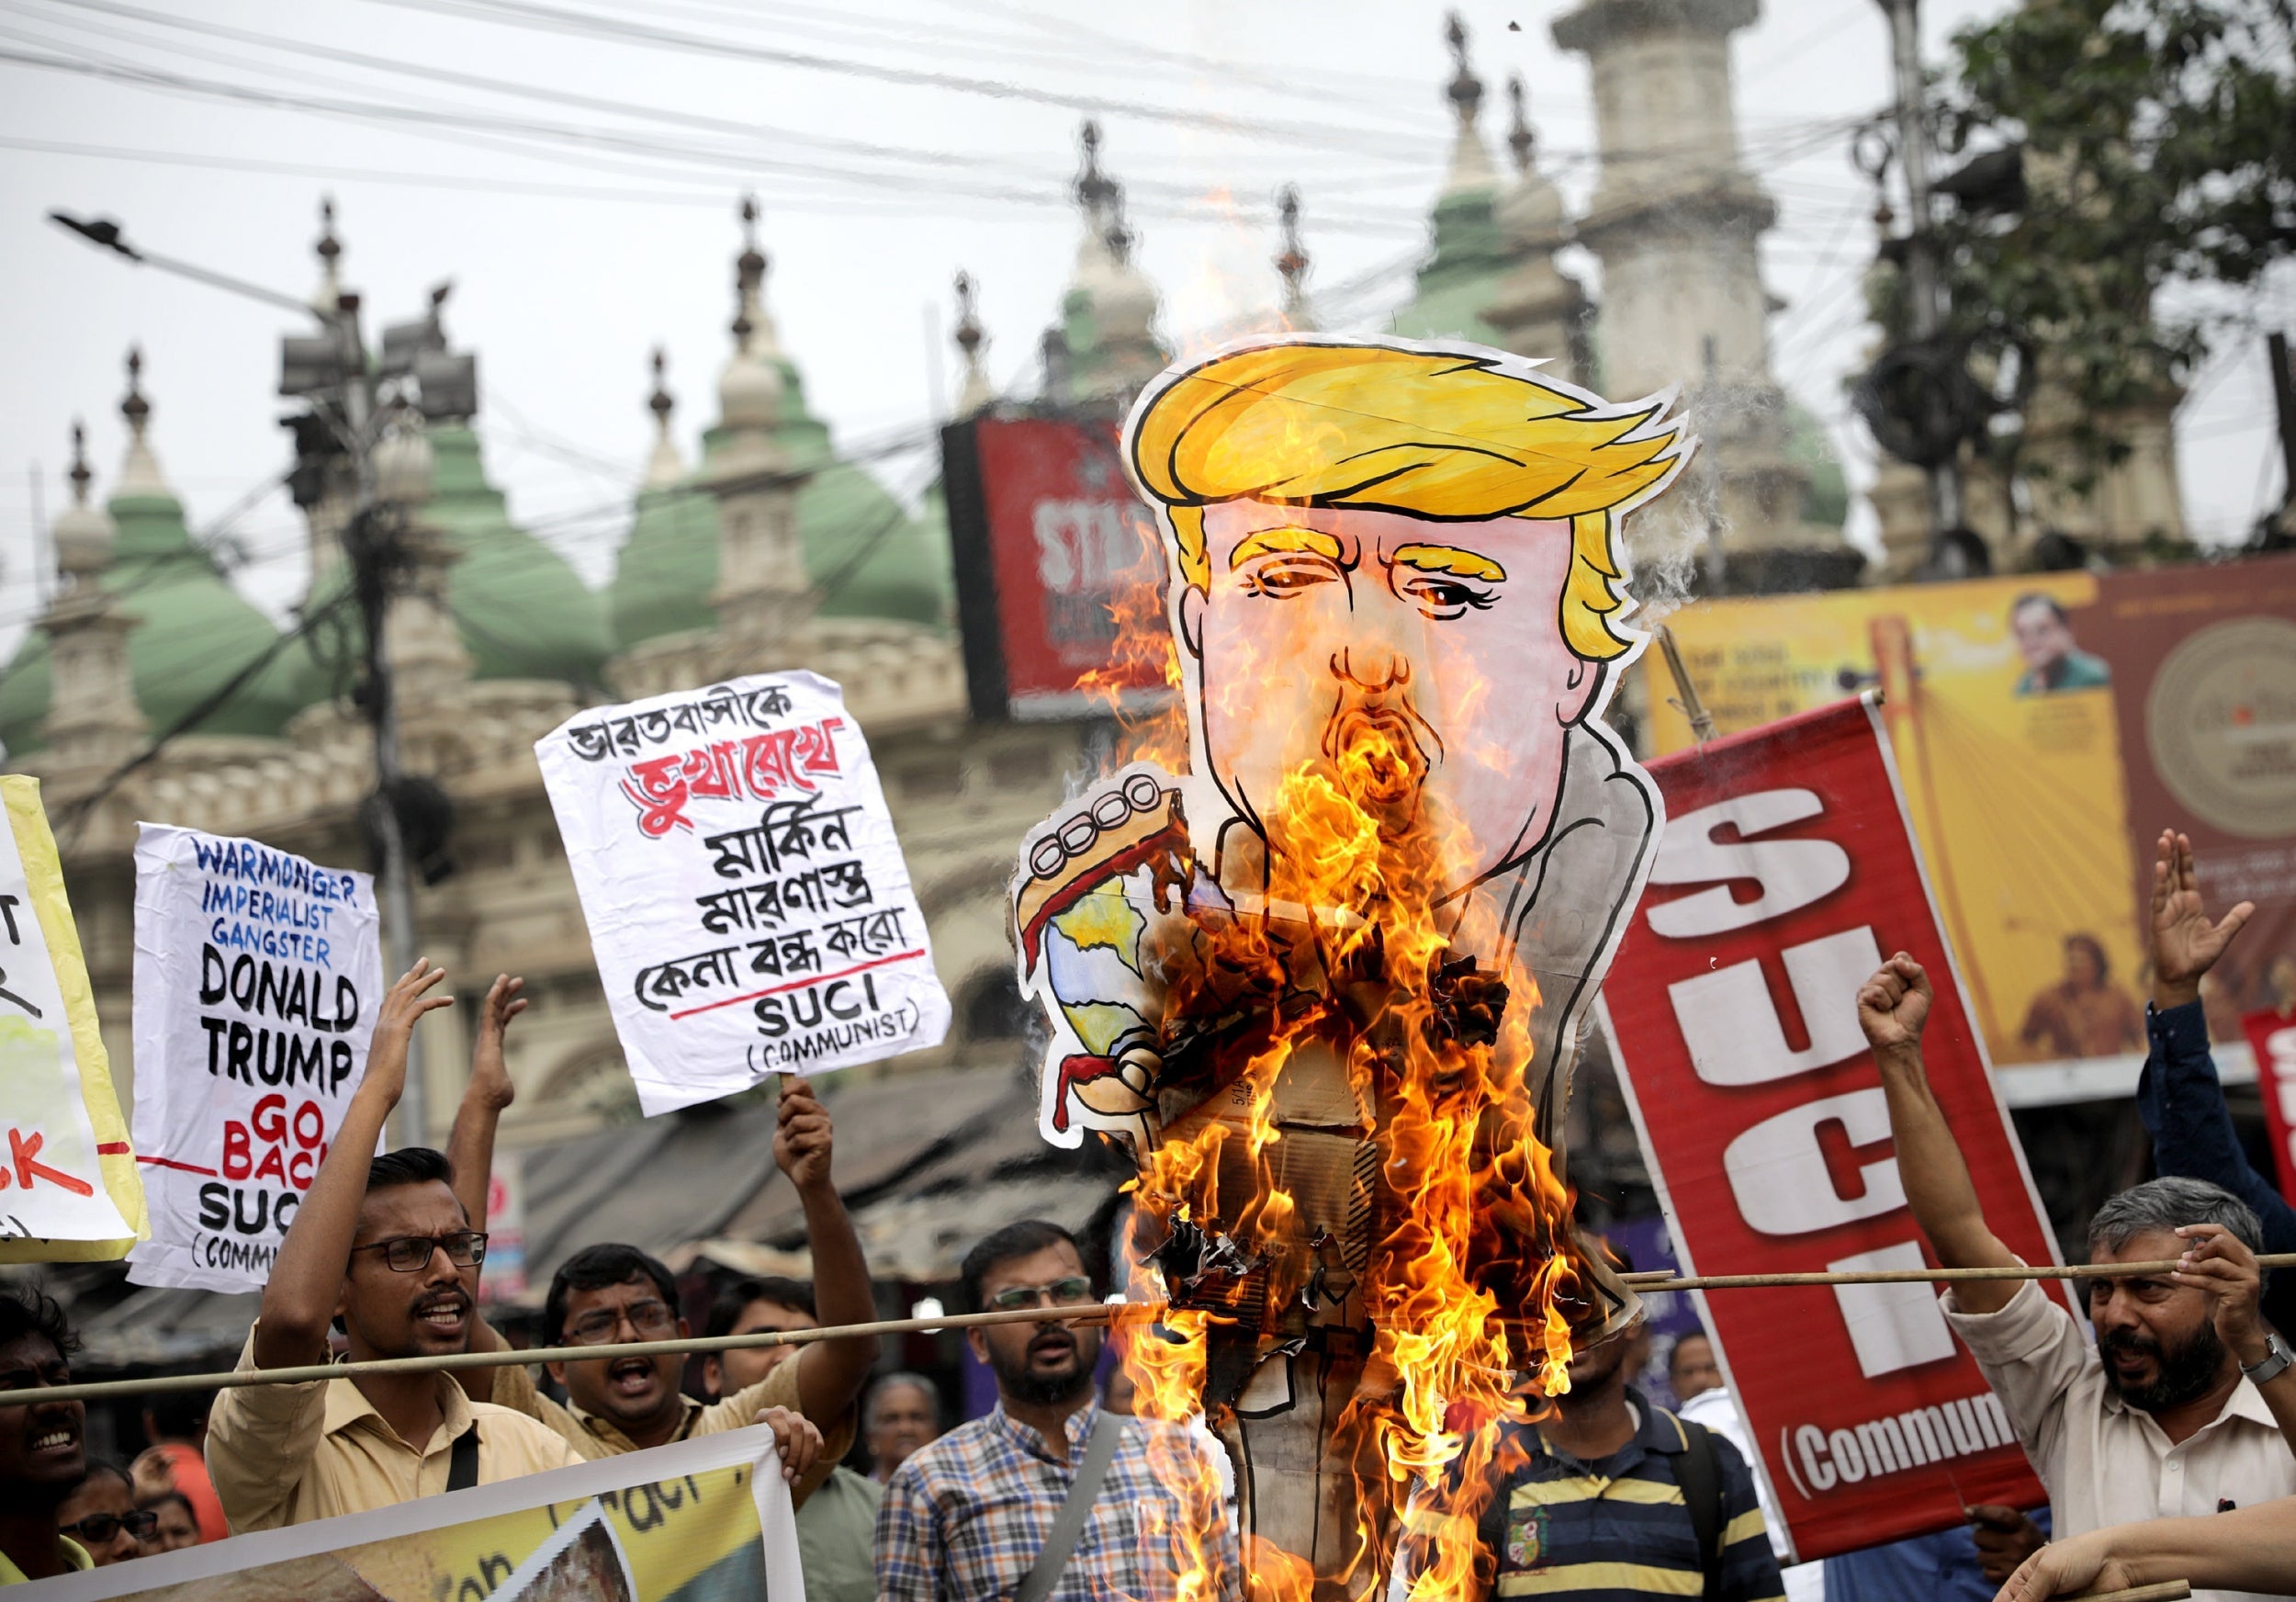 Protesters in Kolkata burn an effigy of Donald Trump as they demonstrate against his visit